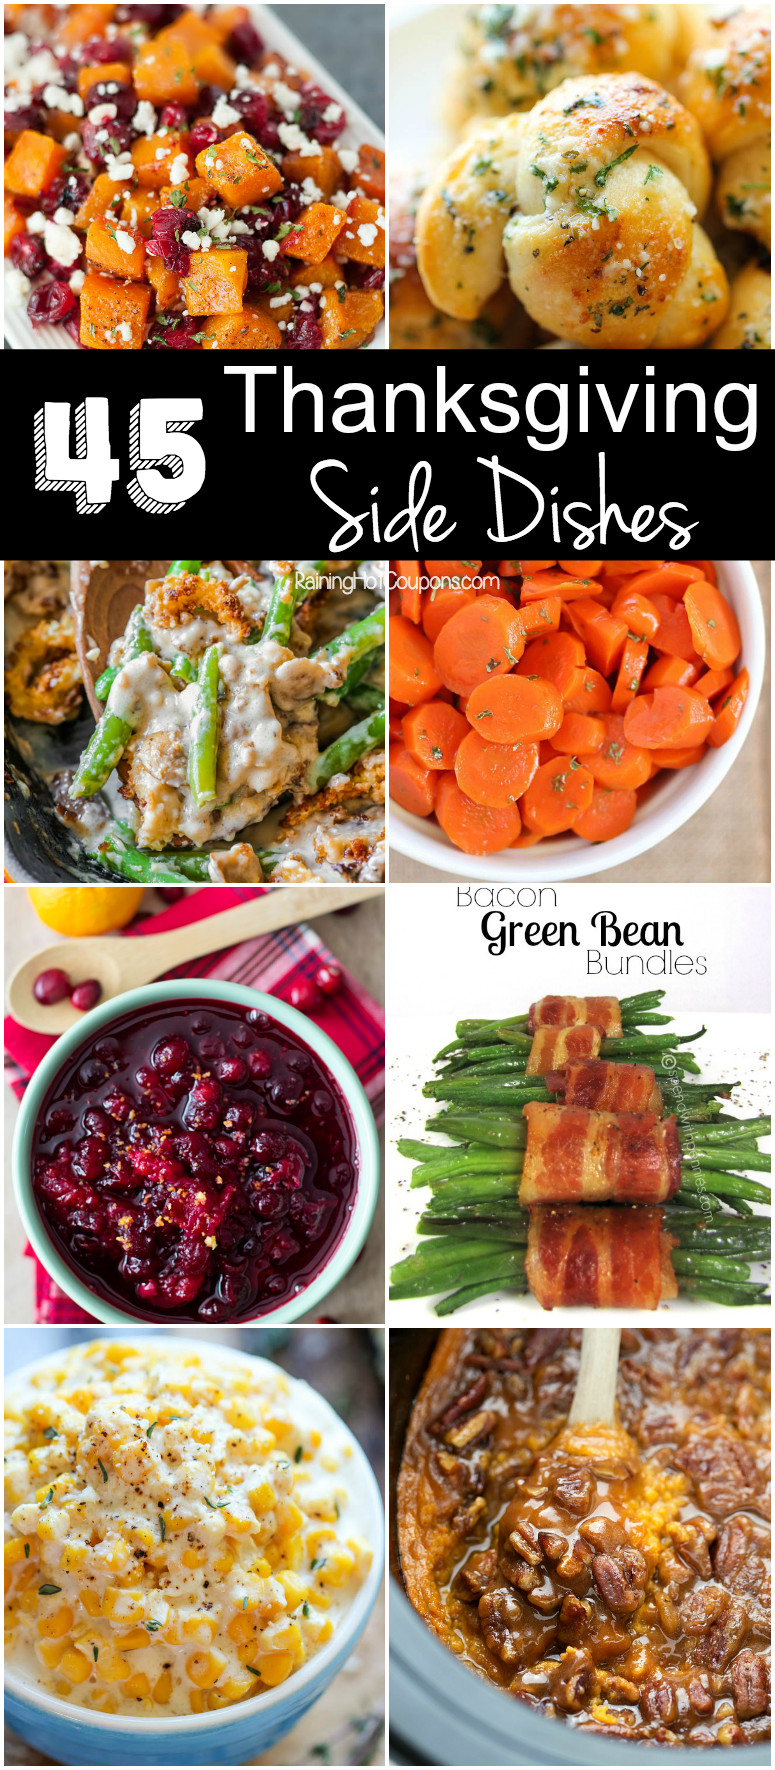 Thanksgiving Side Dishes Ideas
 45 Thanksgiving Side Dishes